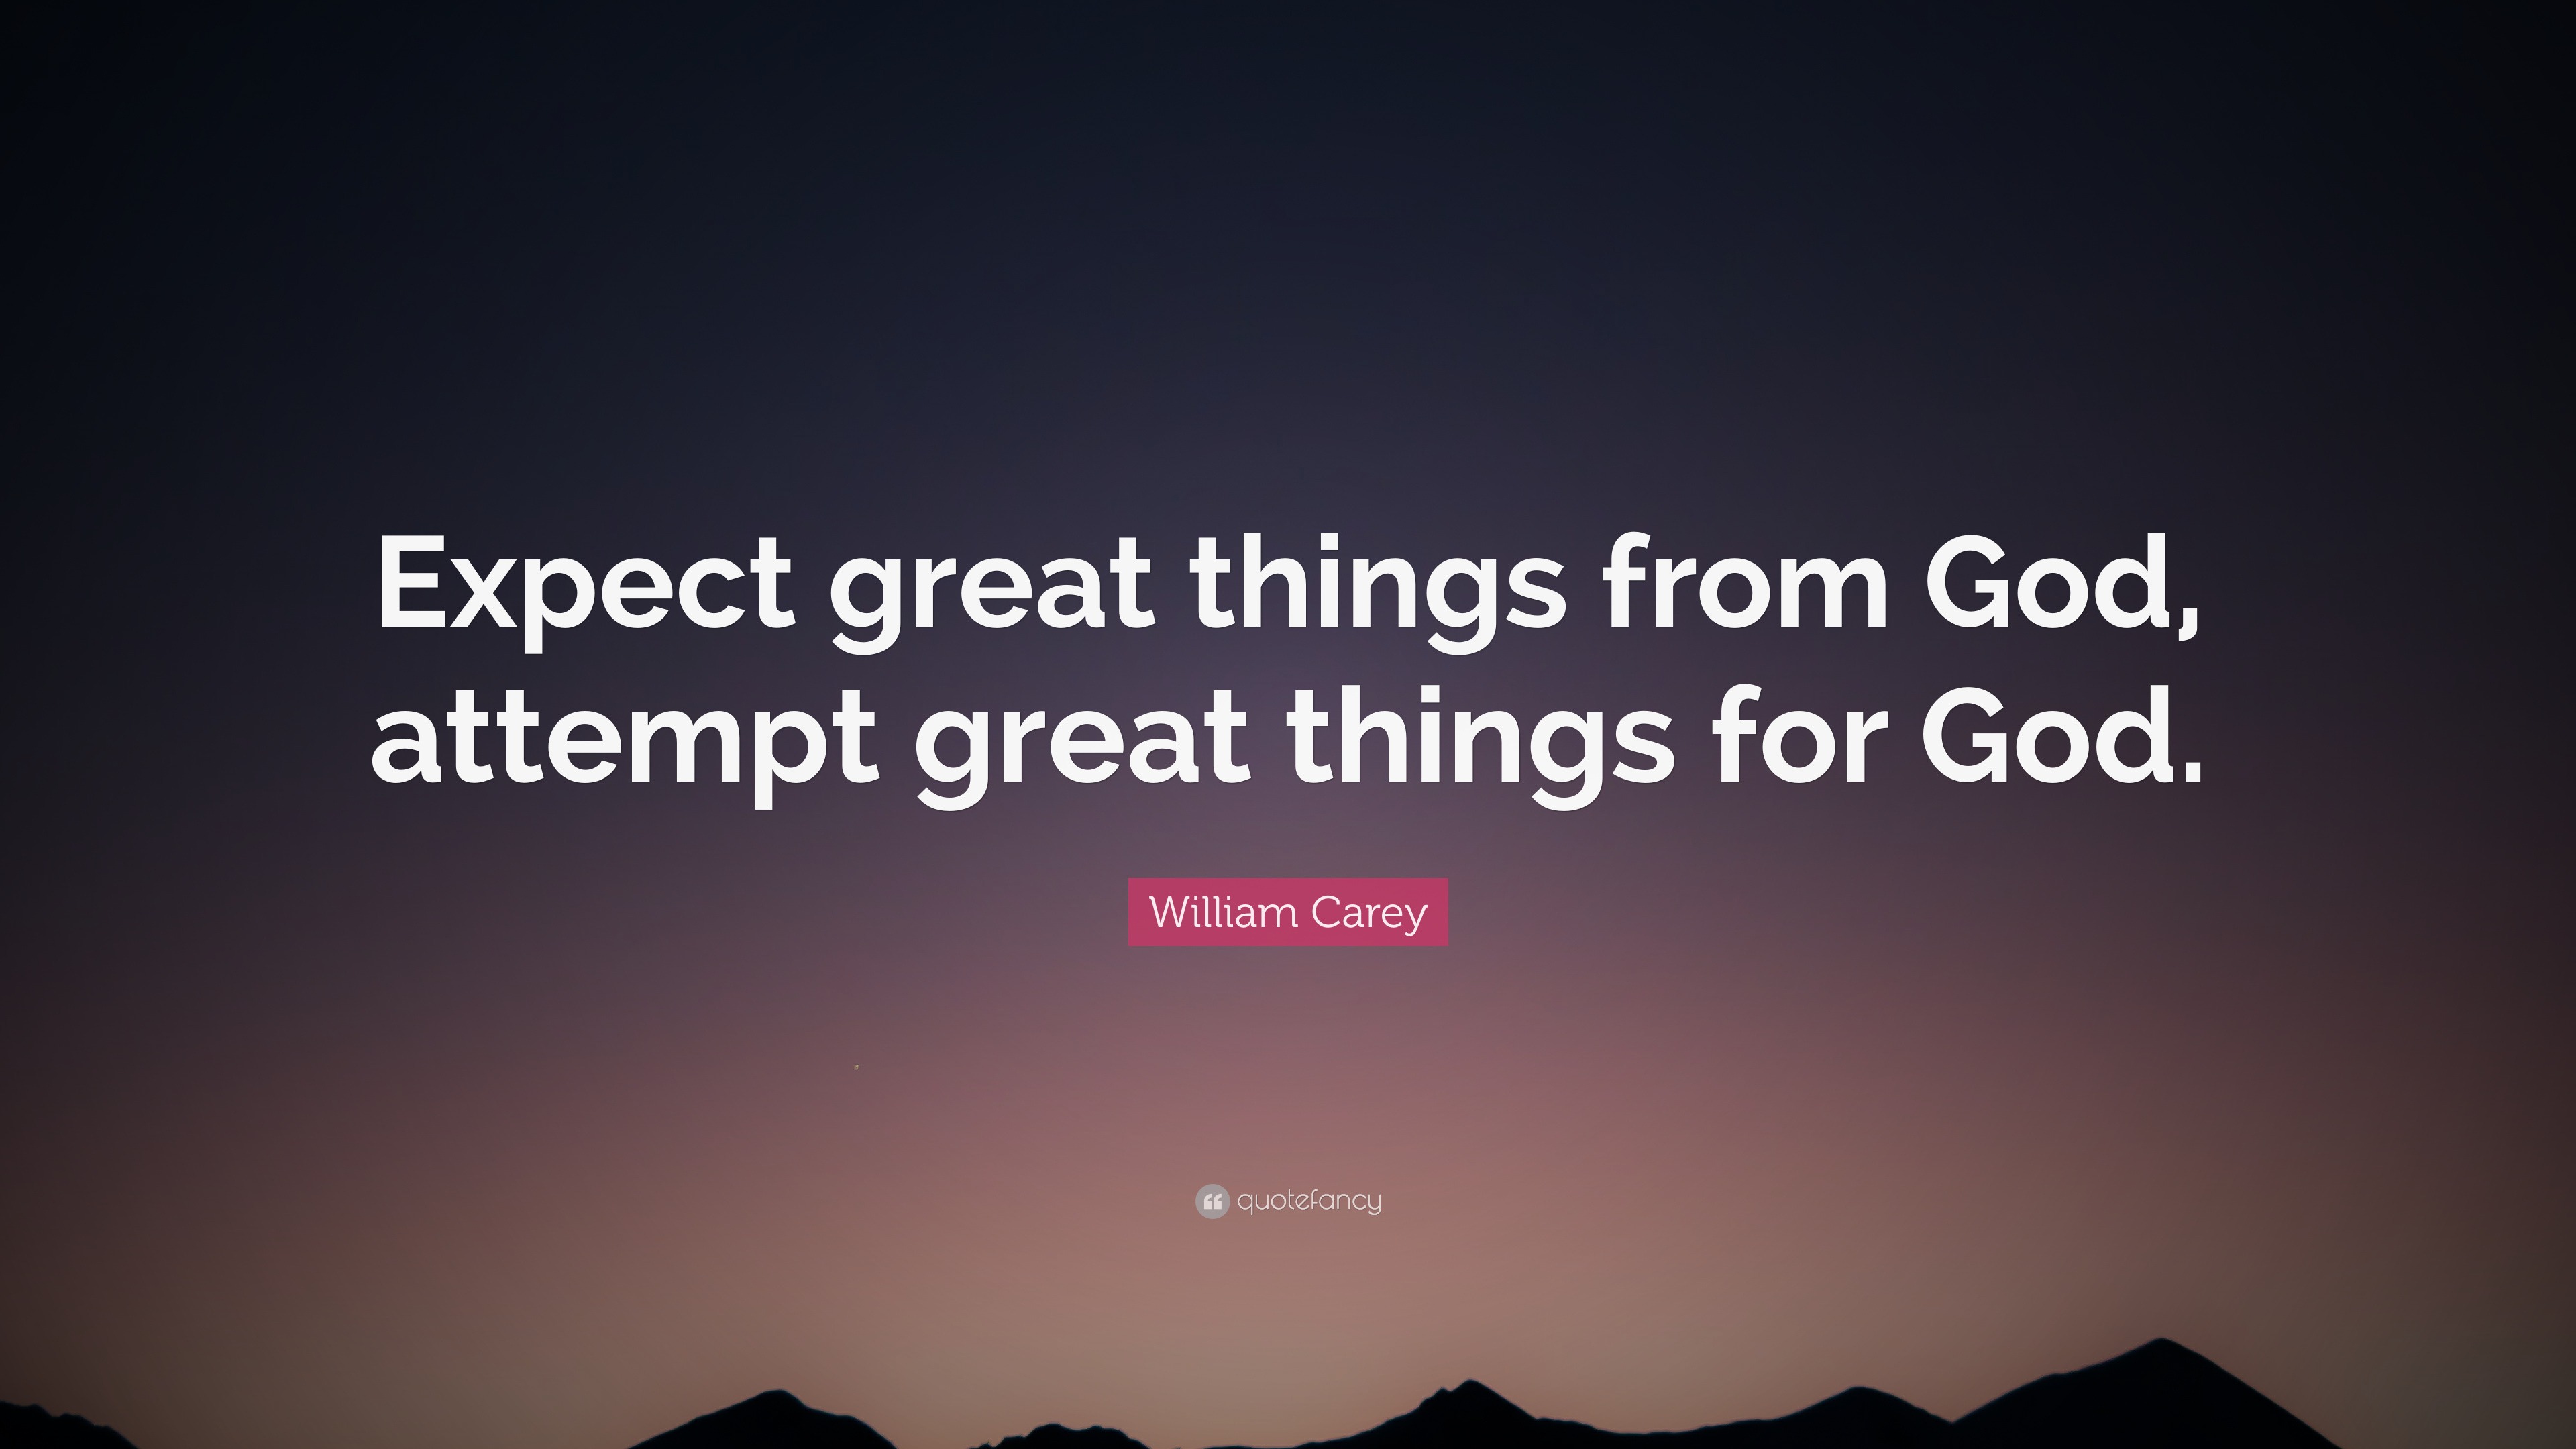 "expect great things from god, attempt great things for god.